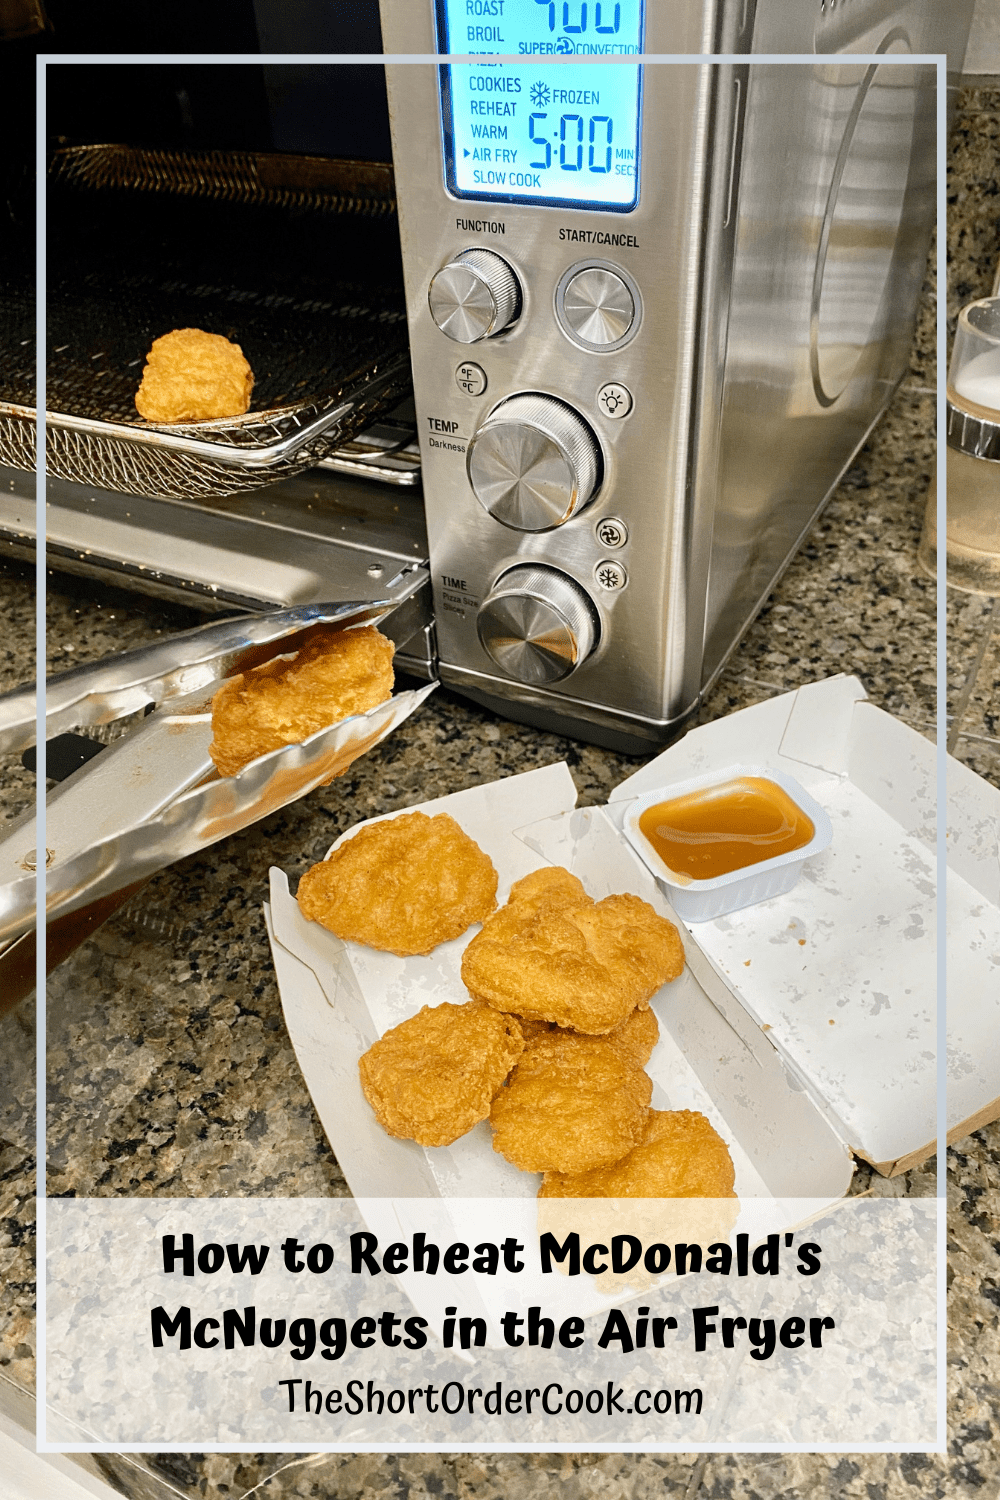 Nuggets being removed from the air fryer with tongs.